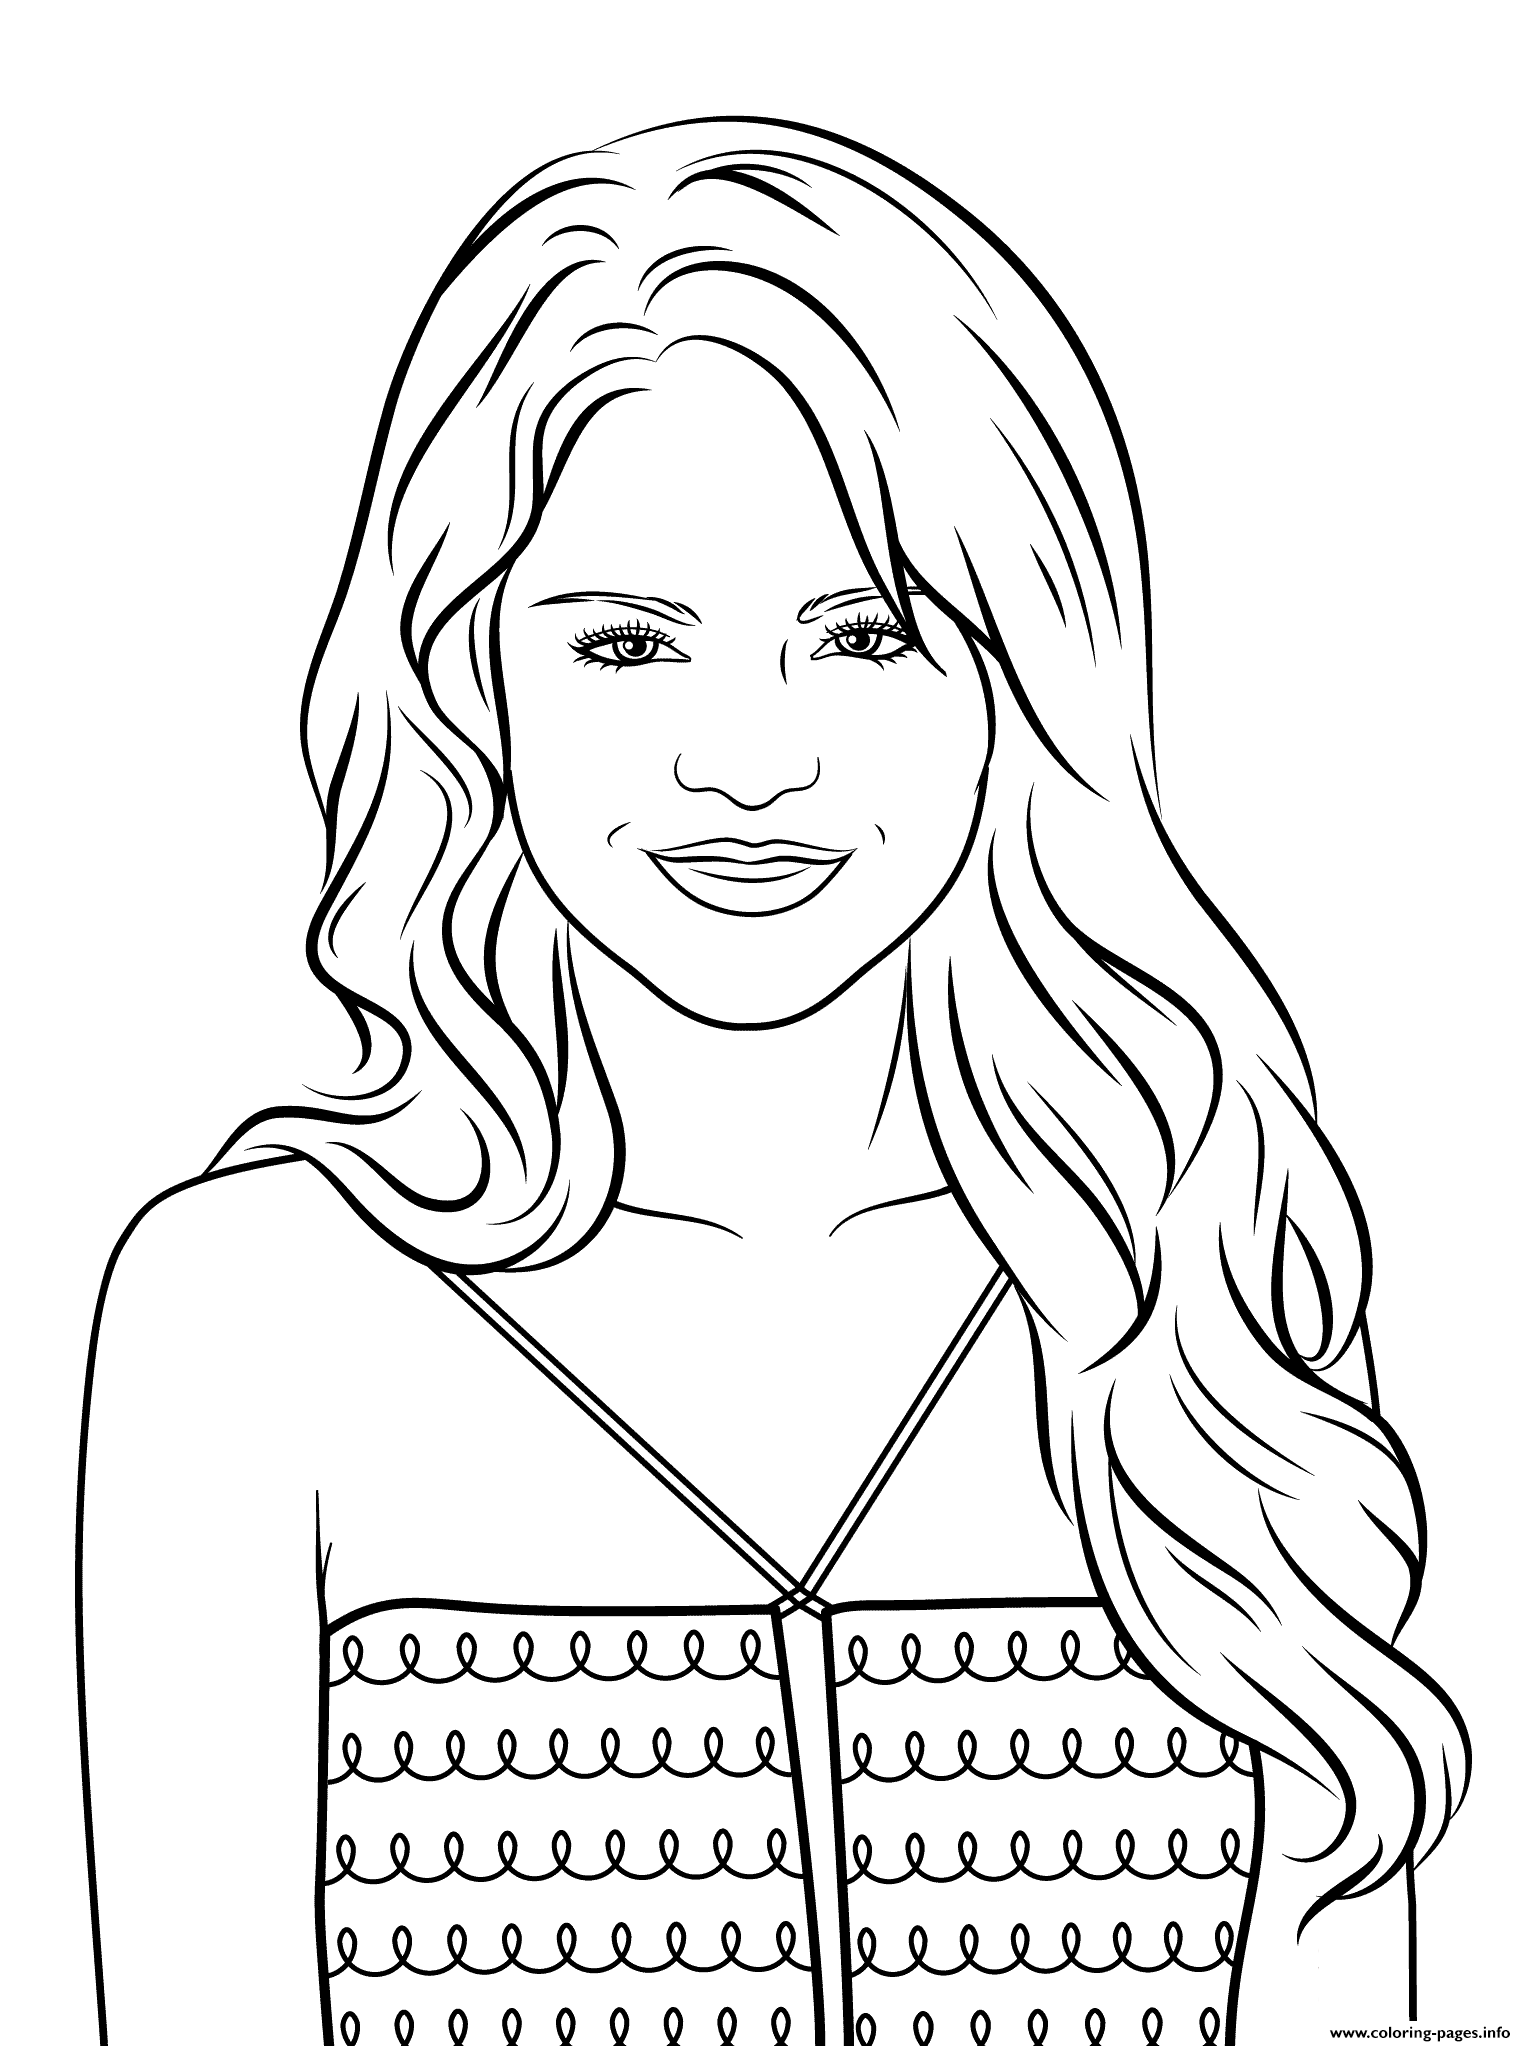 Selena Gomez Celebrity Coloring Pages Printable